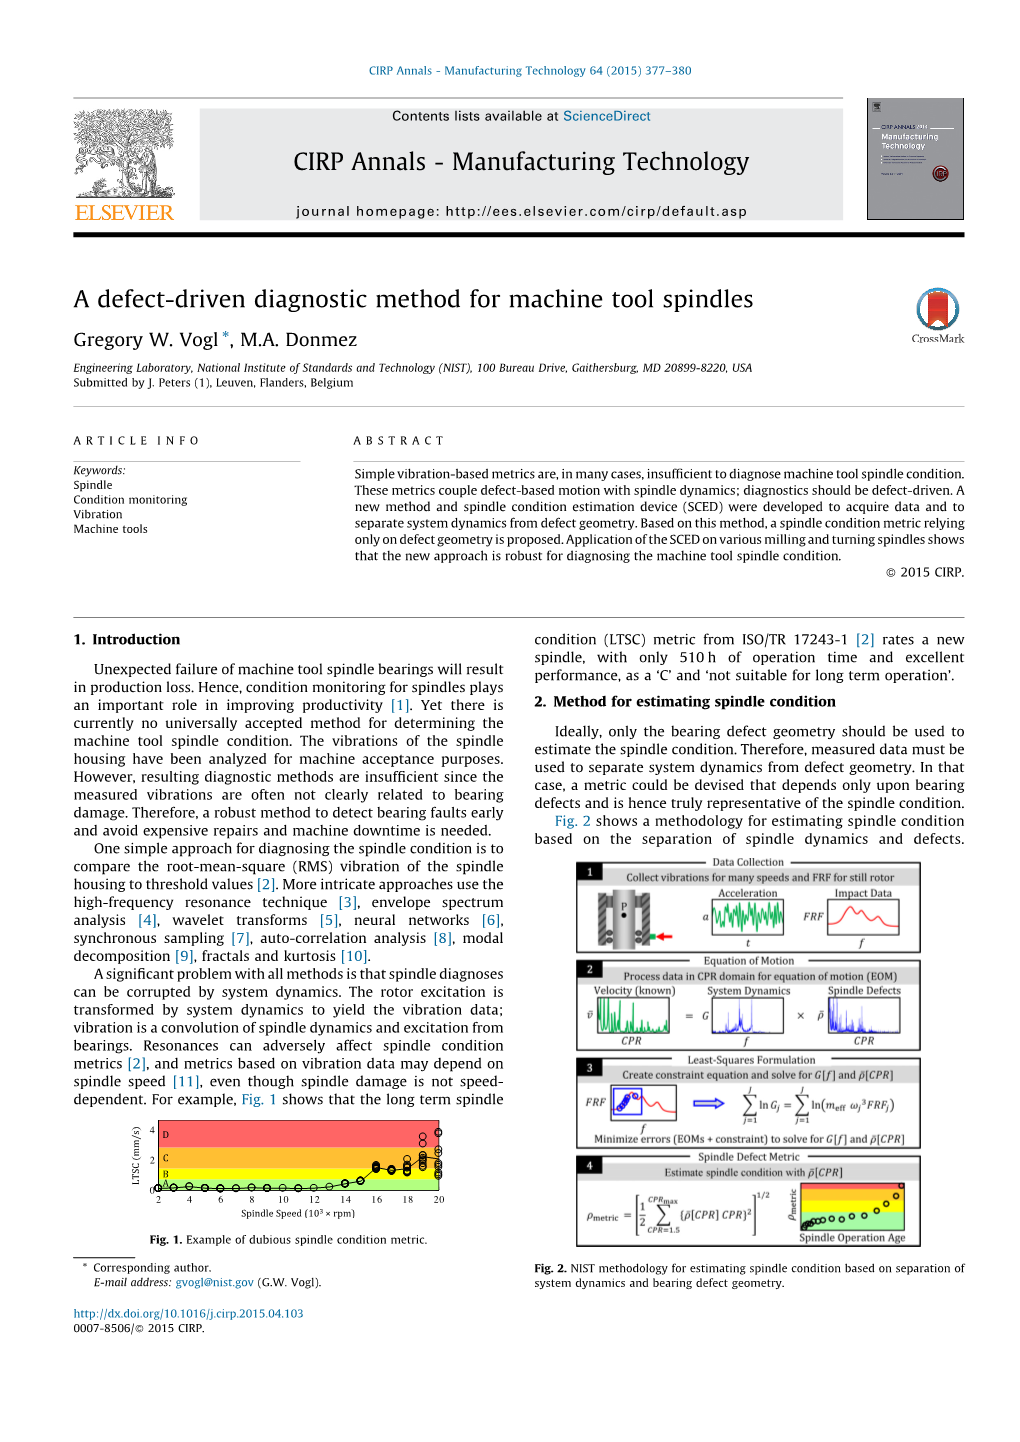 A Defect-Driven Diagnostic Method for Machine Tool Spindles